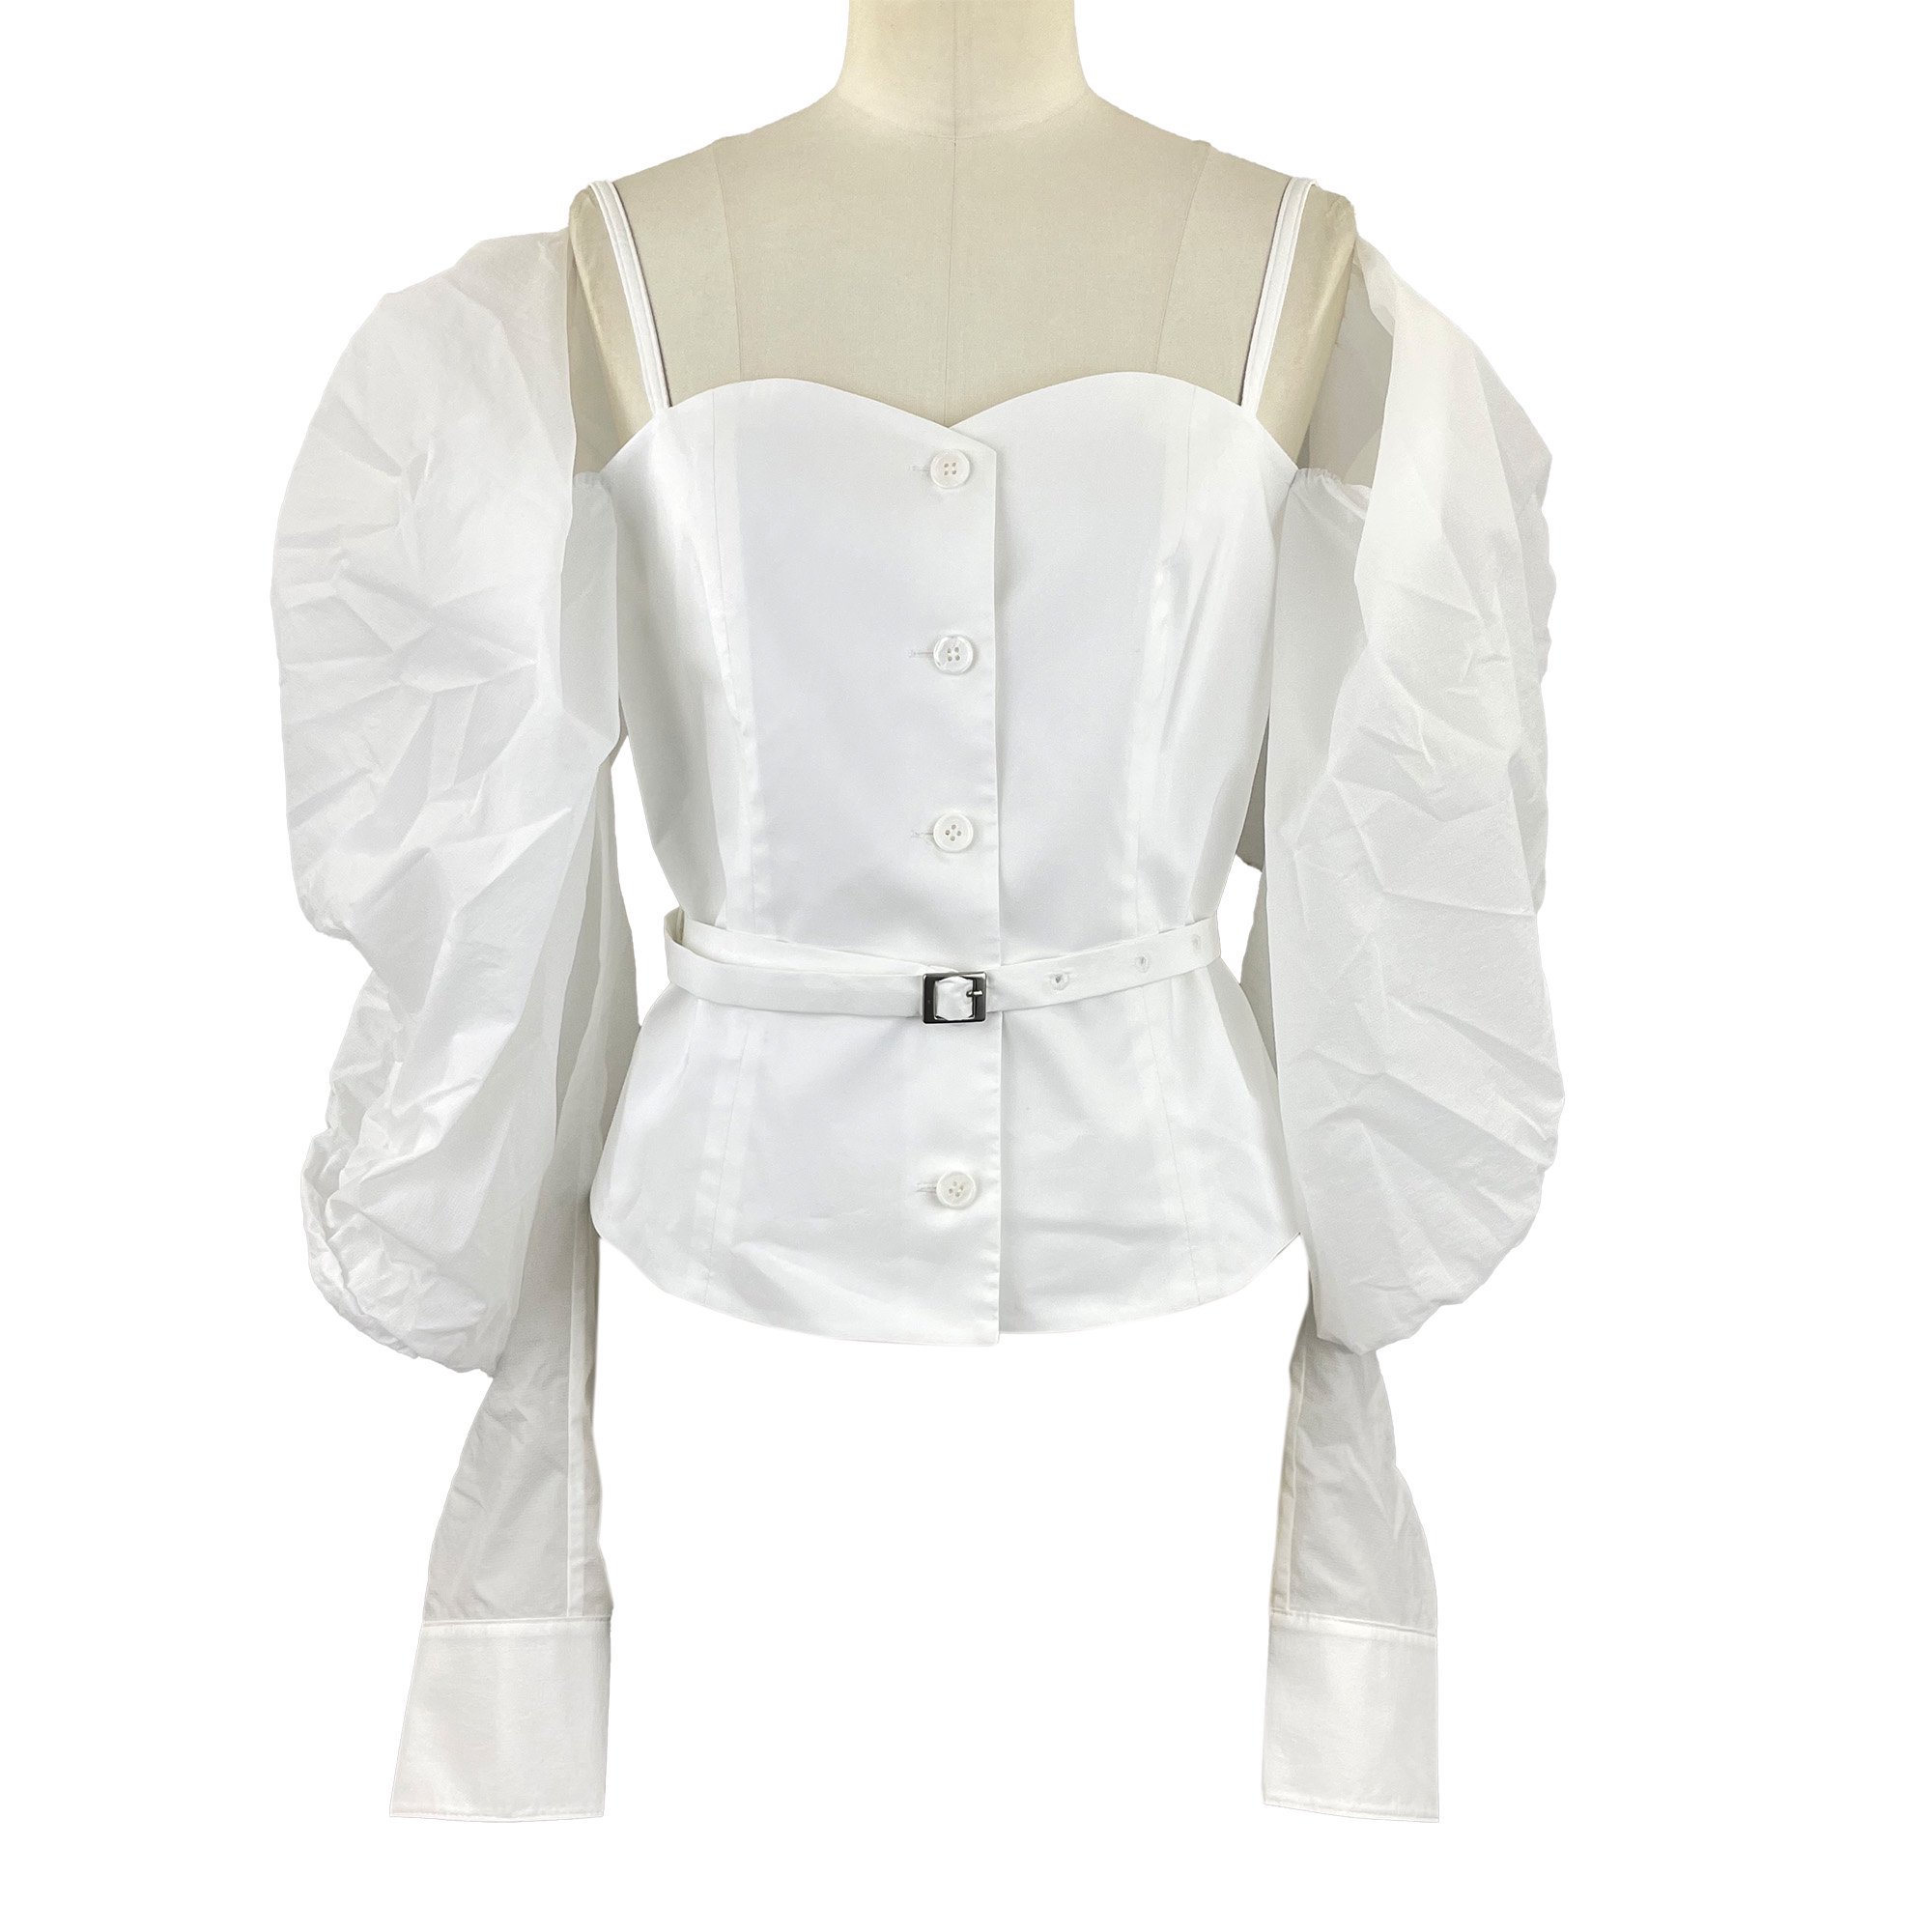 <img class='new_mark_img1' src='https://img.shop-pro.jp/img/new/icons47.gif' style='border:none;display:inline;margin:0px;padding:0px;width:auto;' />BESFXXK / WIND SLEEVE OPEN SHOULDER BLOUSE / WHITE